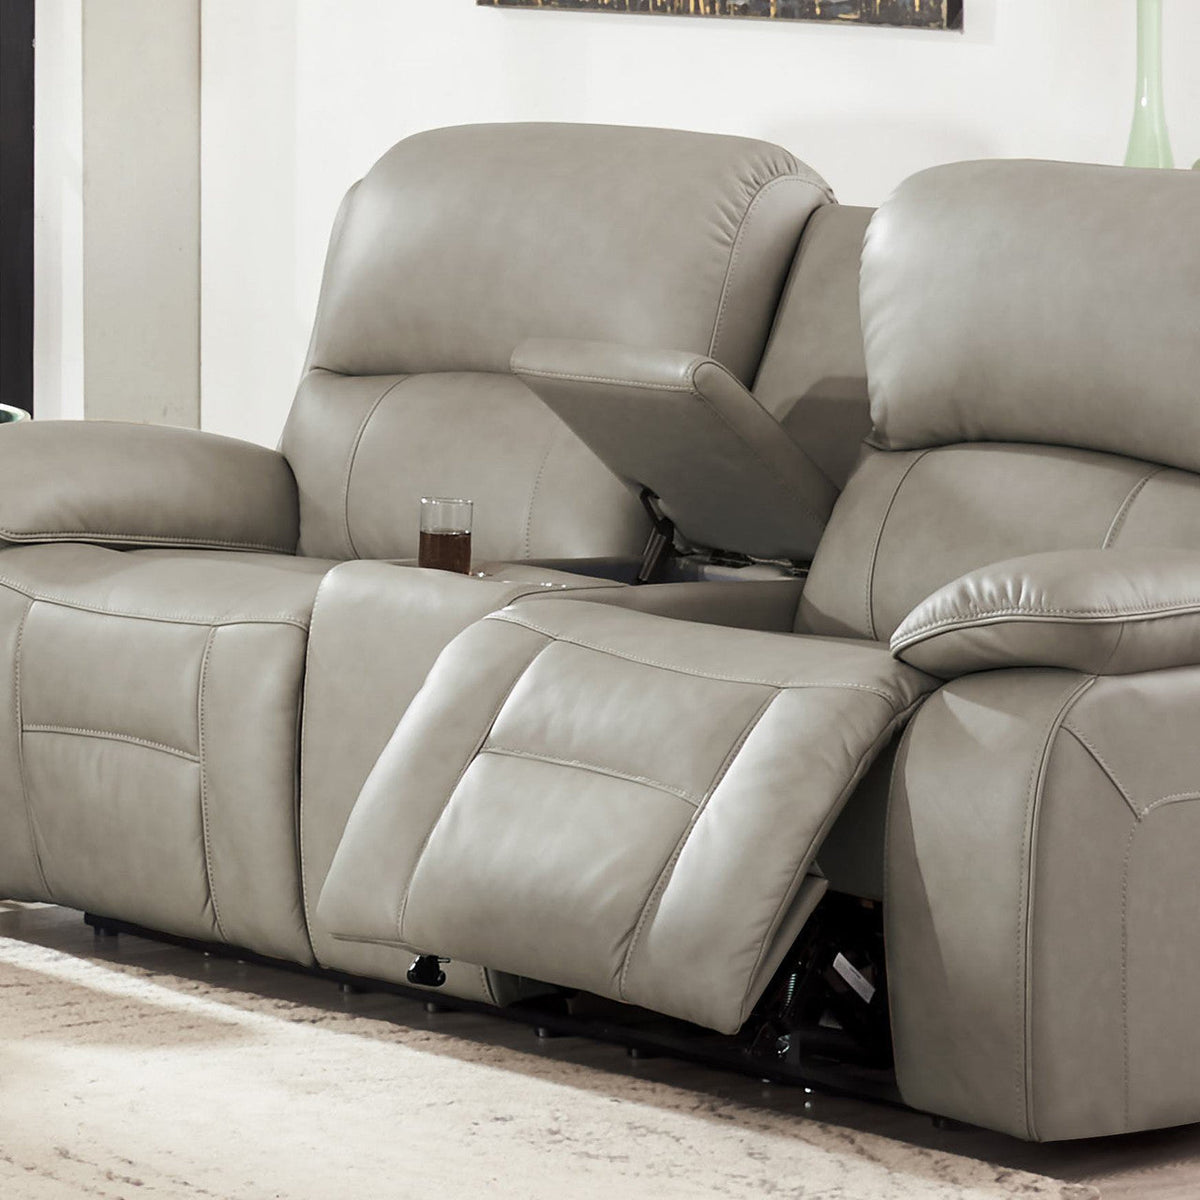 Westminster Zero Gravity Sofa Collection - MJM Furniture